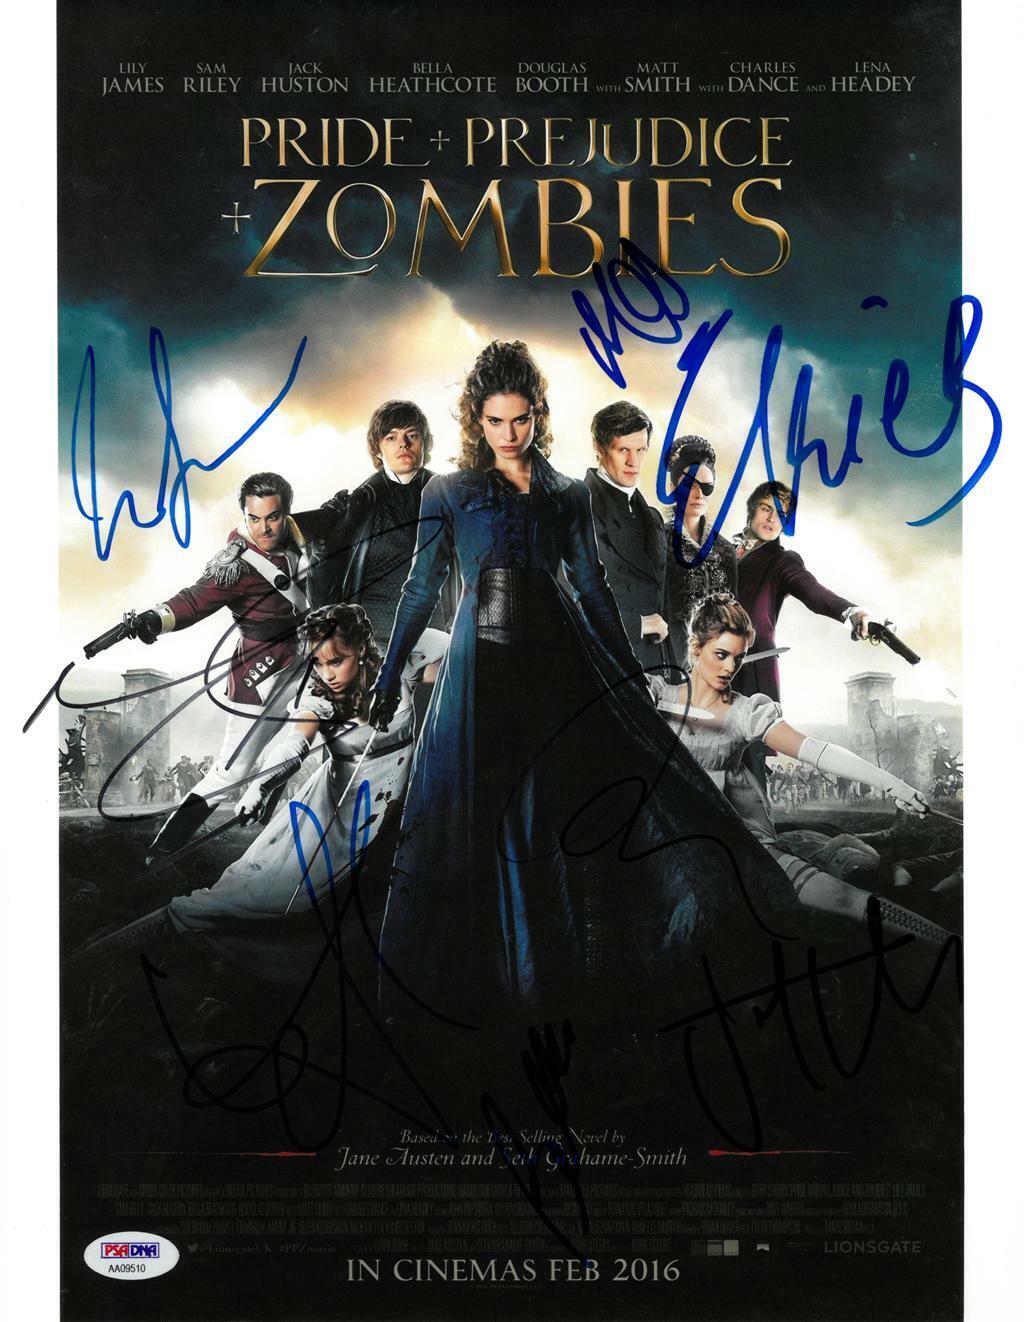 Pride+Prejudice+Zombies Cast Signed Auto 11x14 Photo Poster painting 8 Sigs PSA/DNA #AA09510